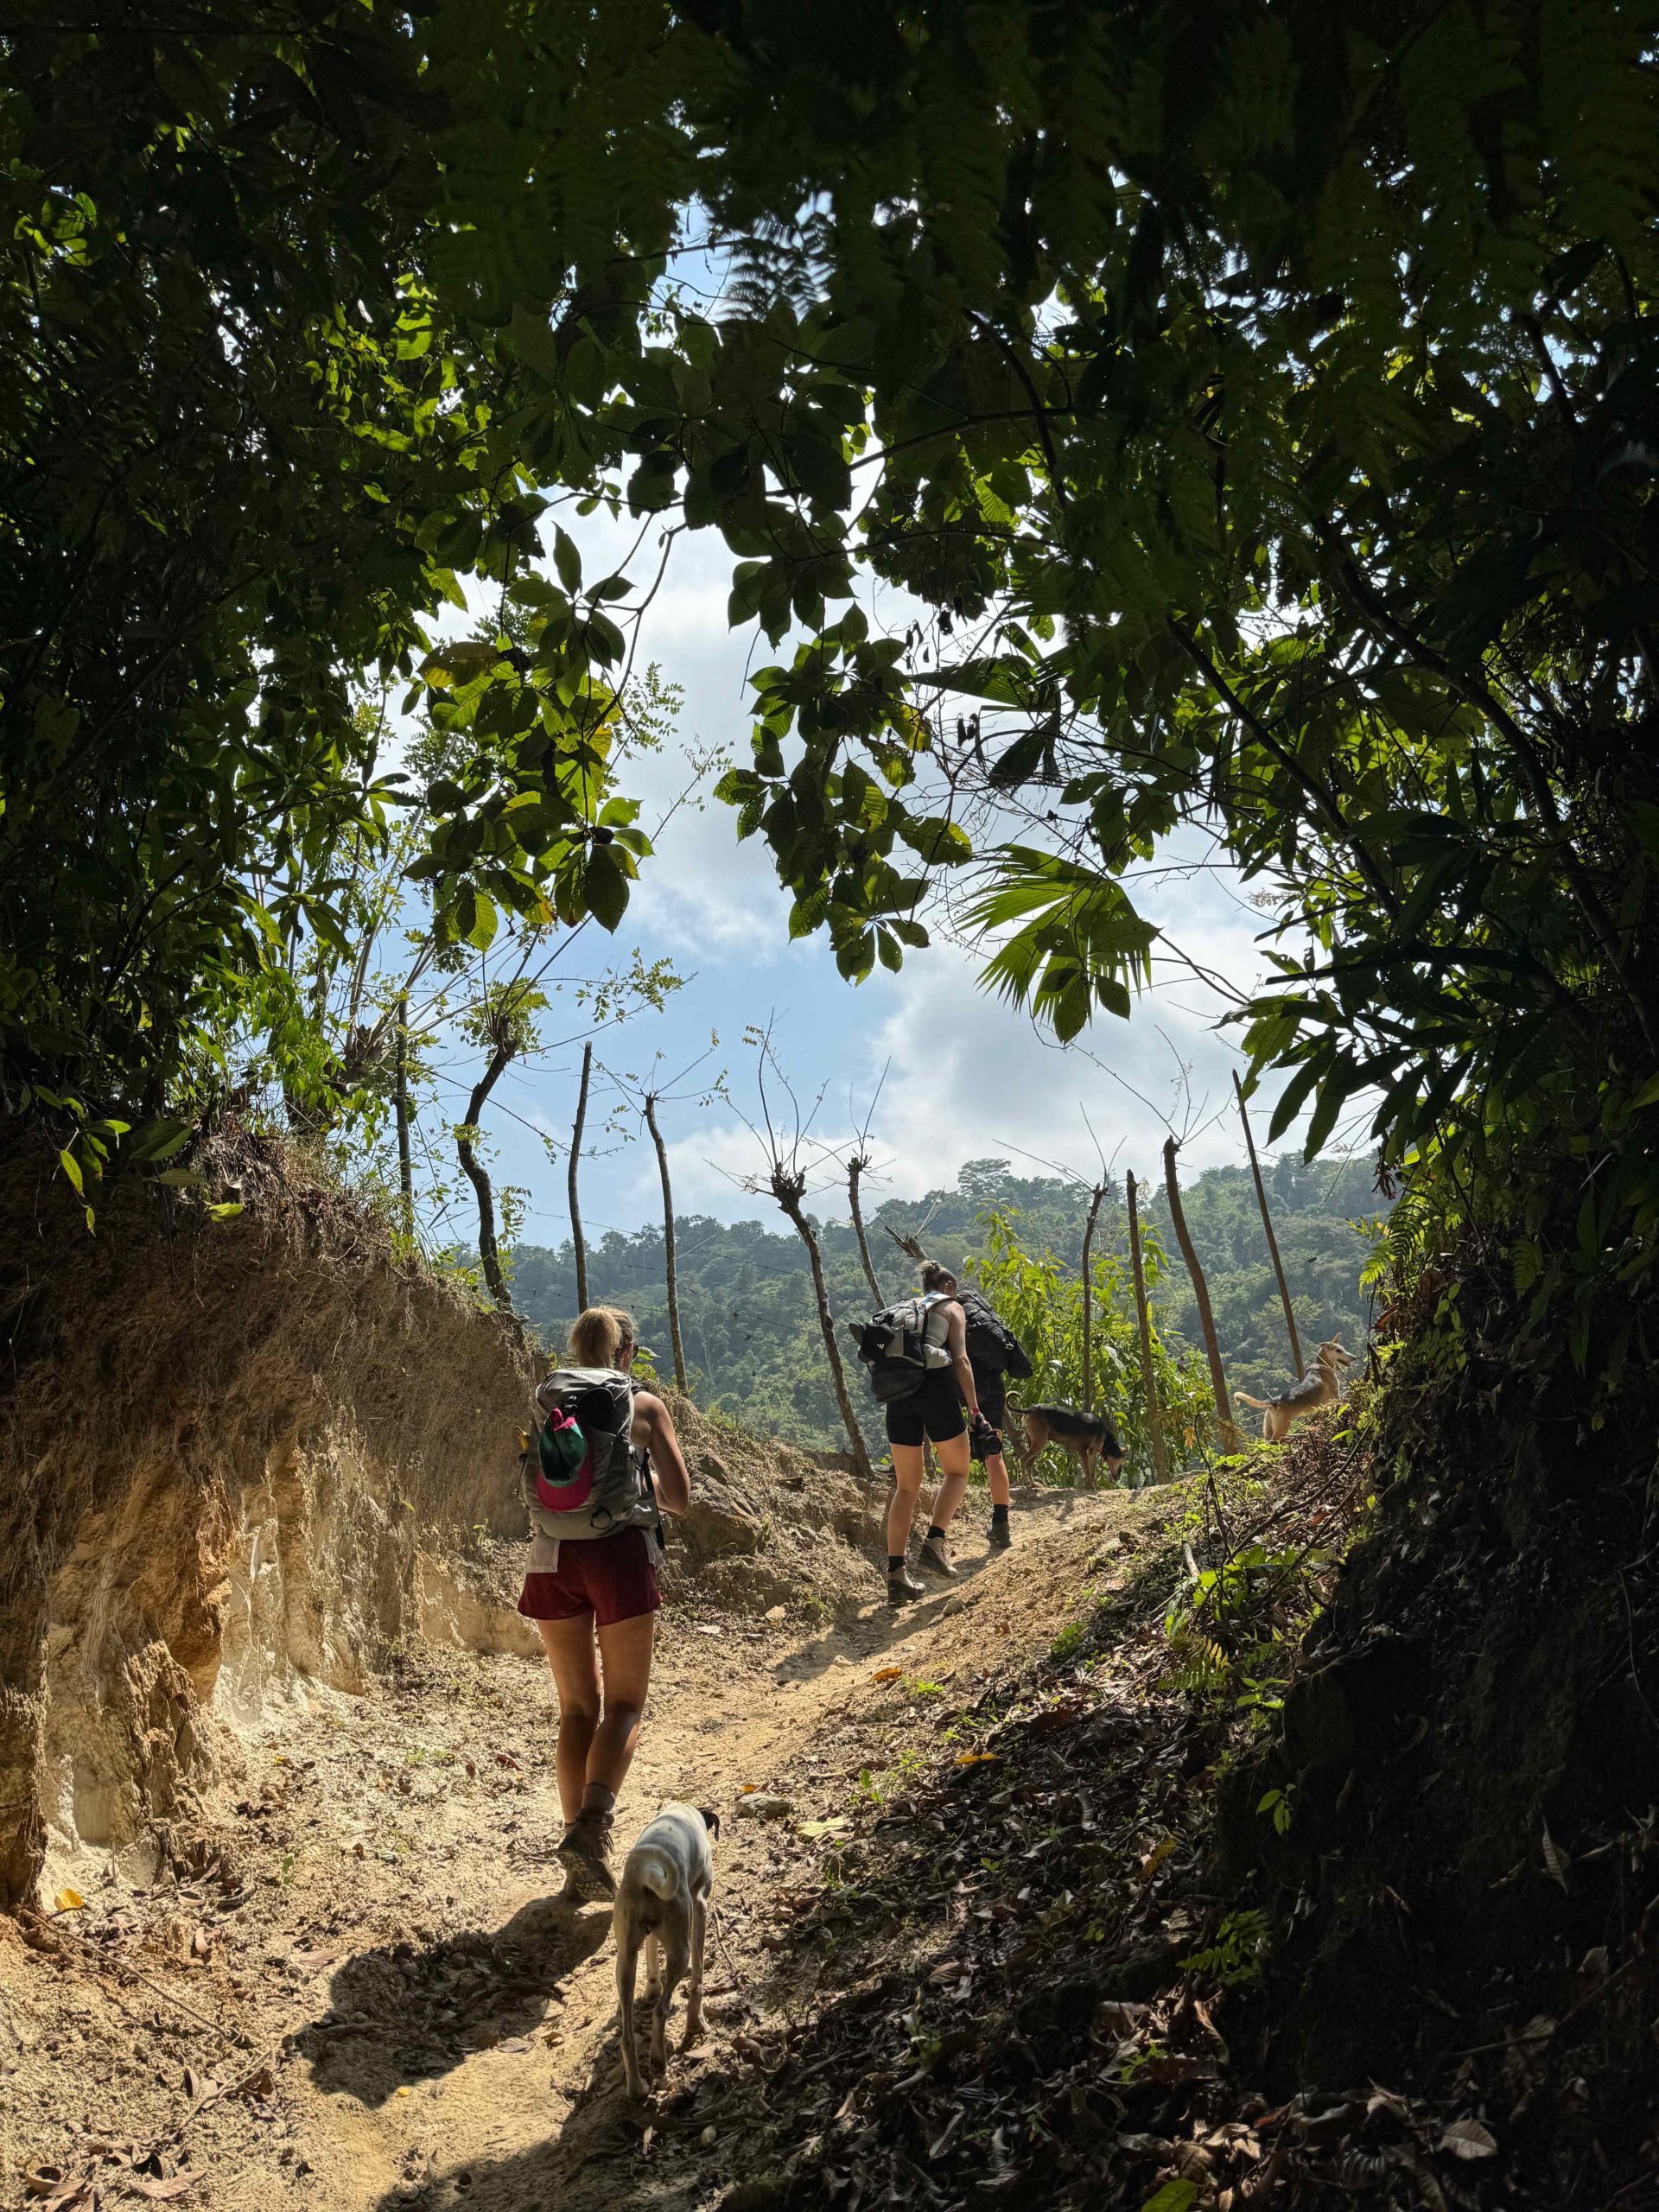 Two women and a dog hiking uphill on the Lost City Trek in Colombia